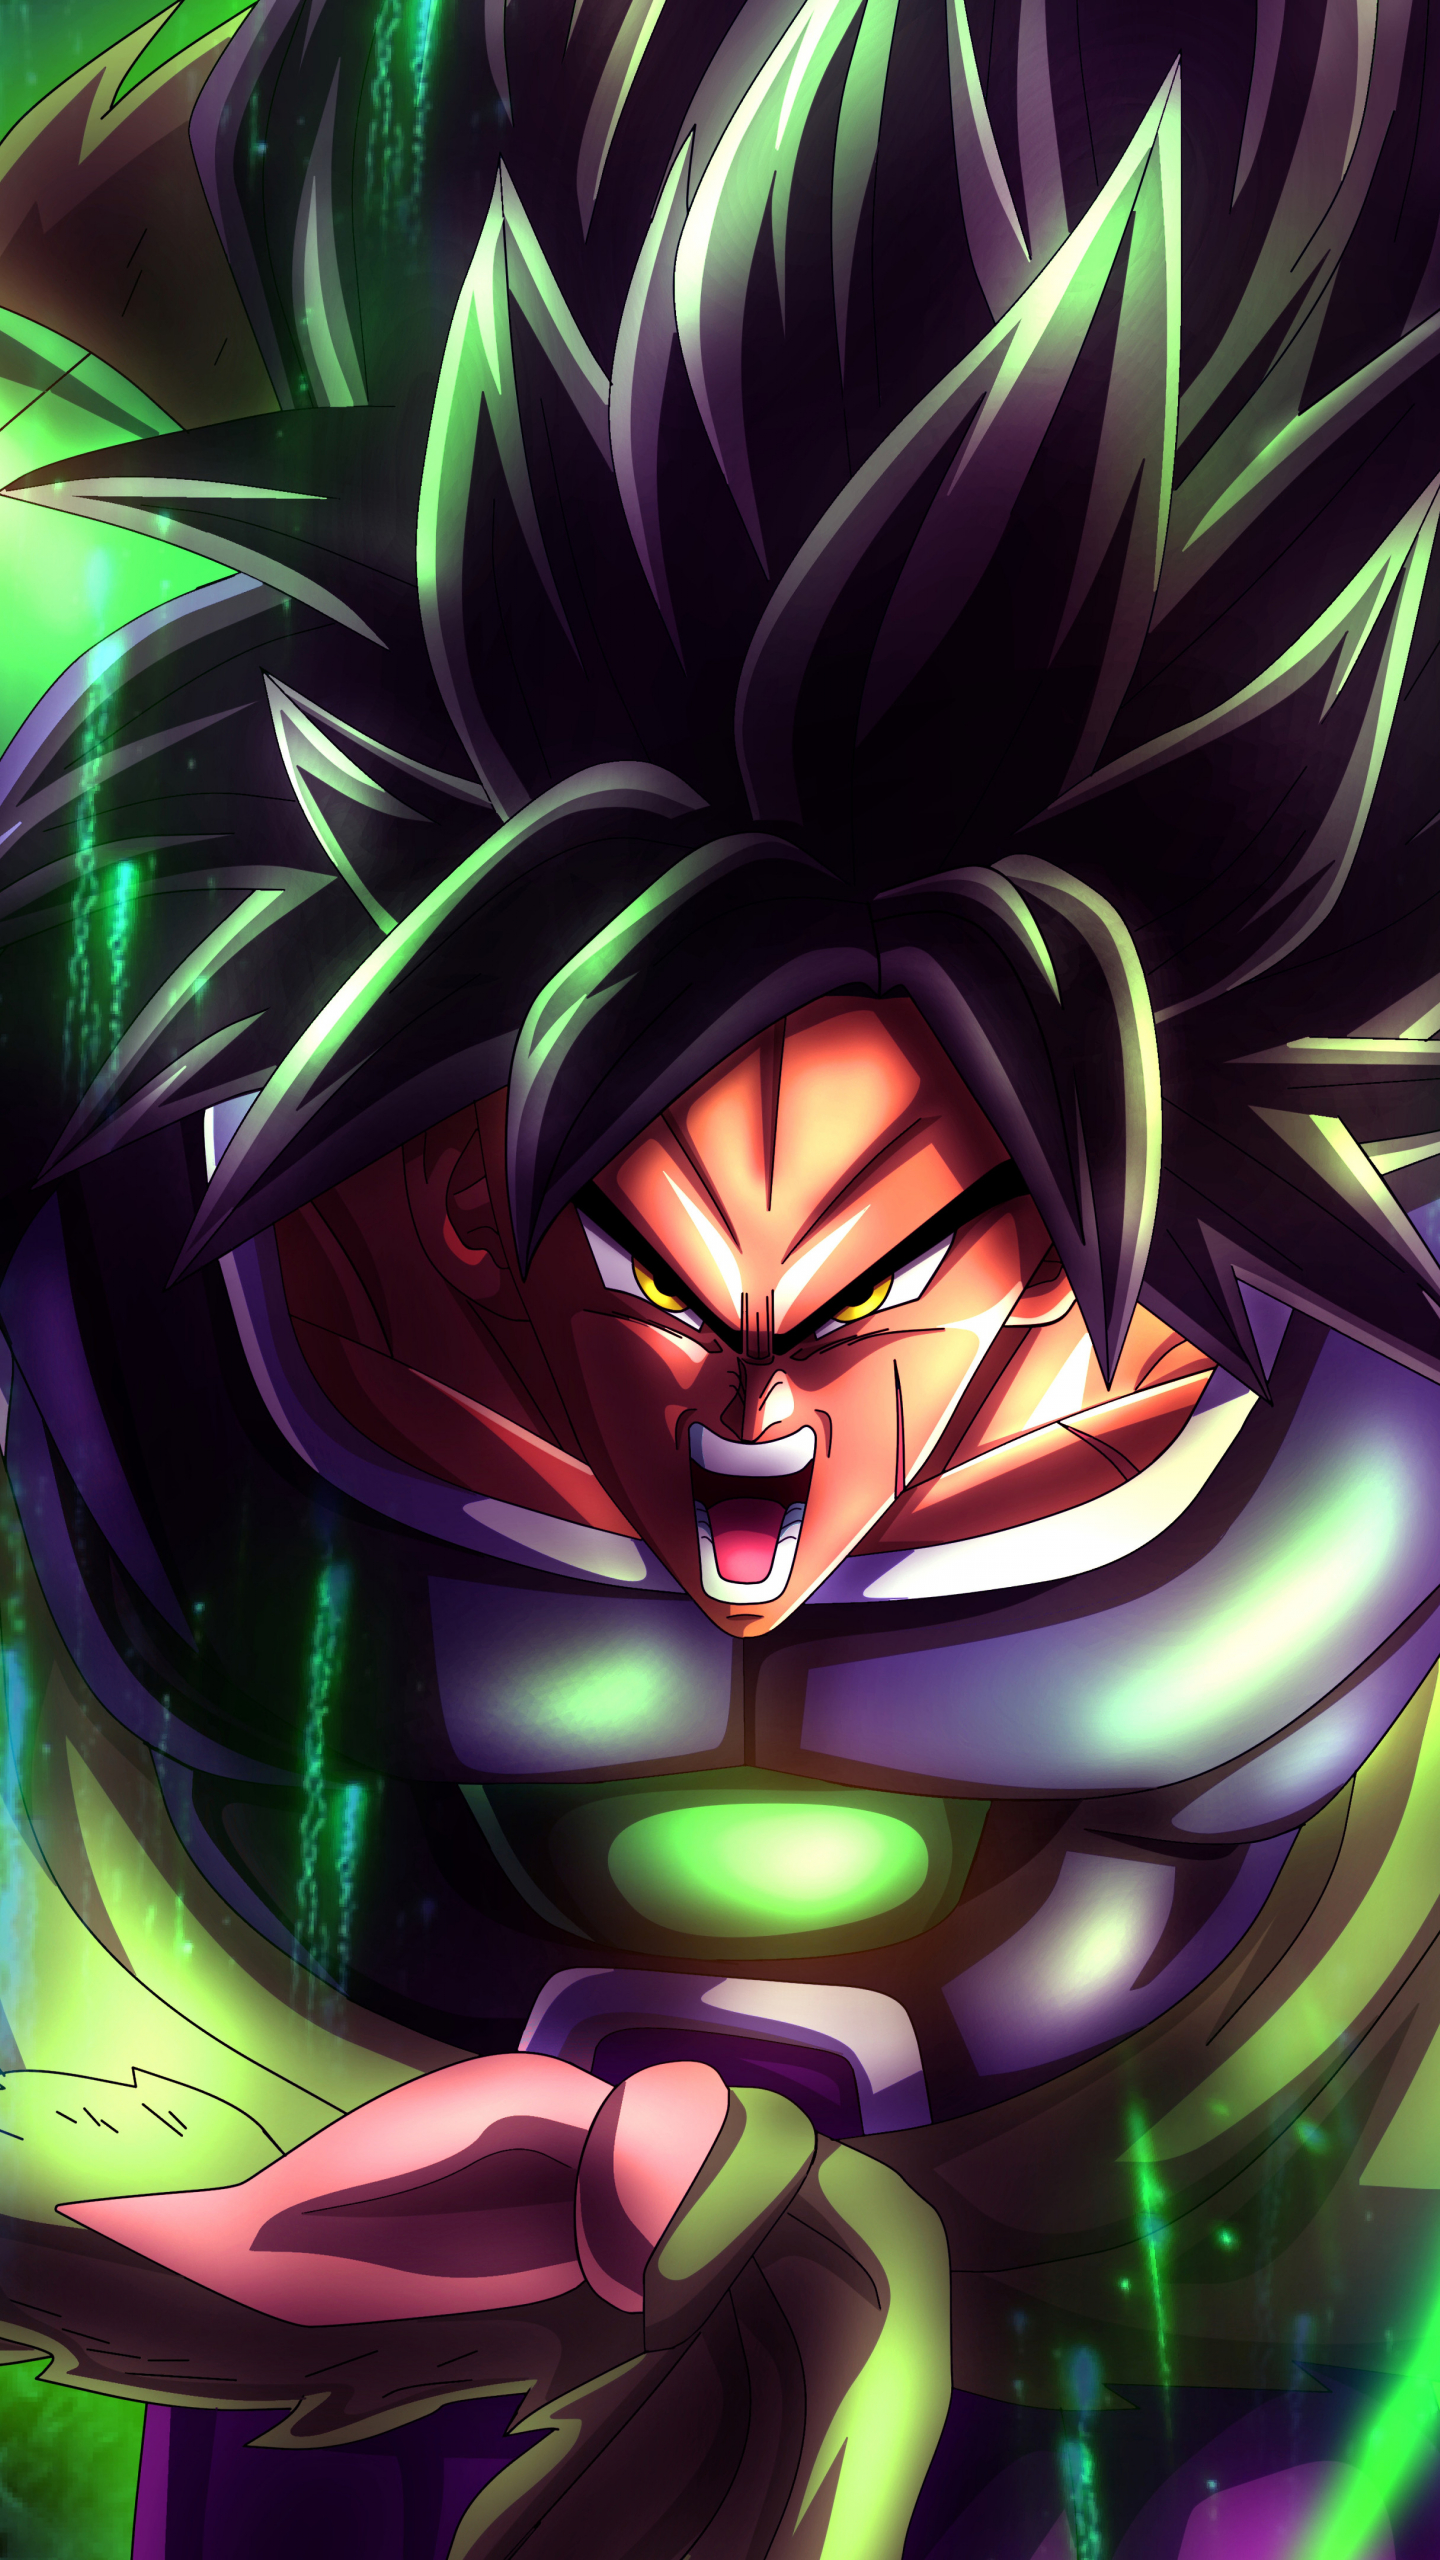 Free download Dragon Ball Super Broly Movie 4K 8K HD Wallpaper [7680x4320] for your Desktop, Mobile & Tablet. Explore Dragon Ball Super Broly HD Wallpaper. Dragon Ball Super: Broly